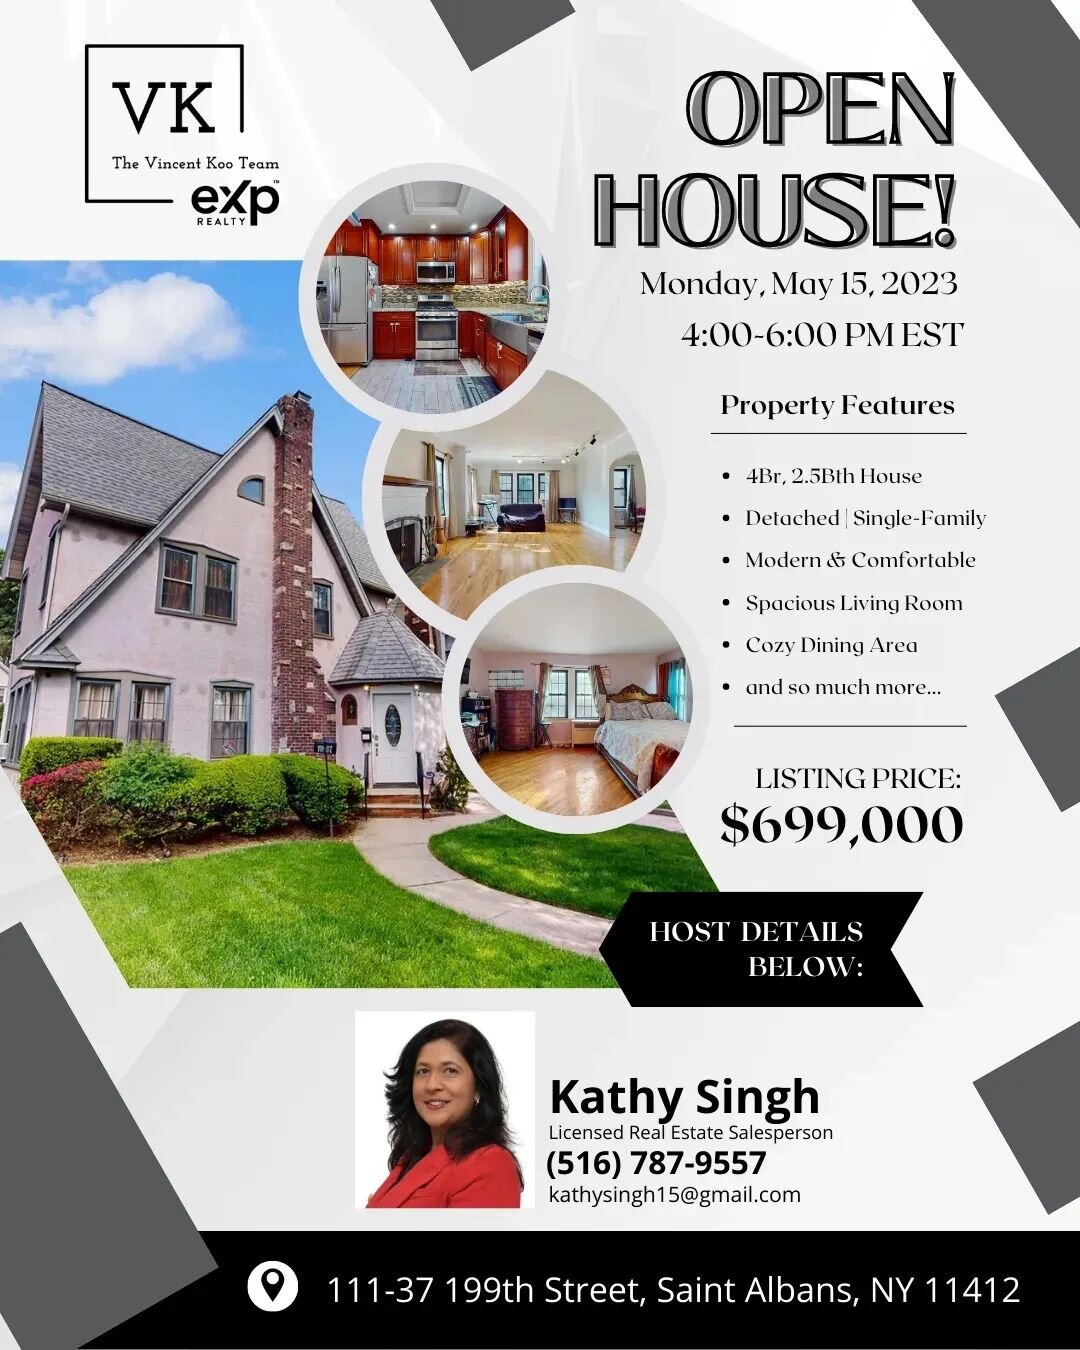 Join us today from 4-6PM for an exciting open house event at our stunning listing, located at 111-37 199th Street in Saint Albans, NY 11412. Don't miss out on this opportunity to explore the charming details and spacious layout of this beautiful prop